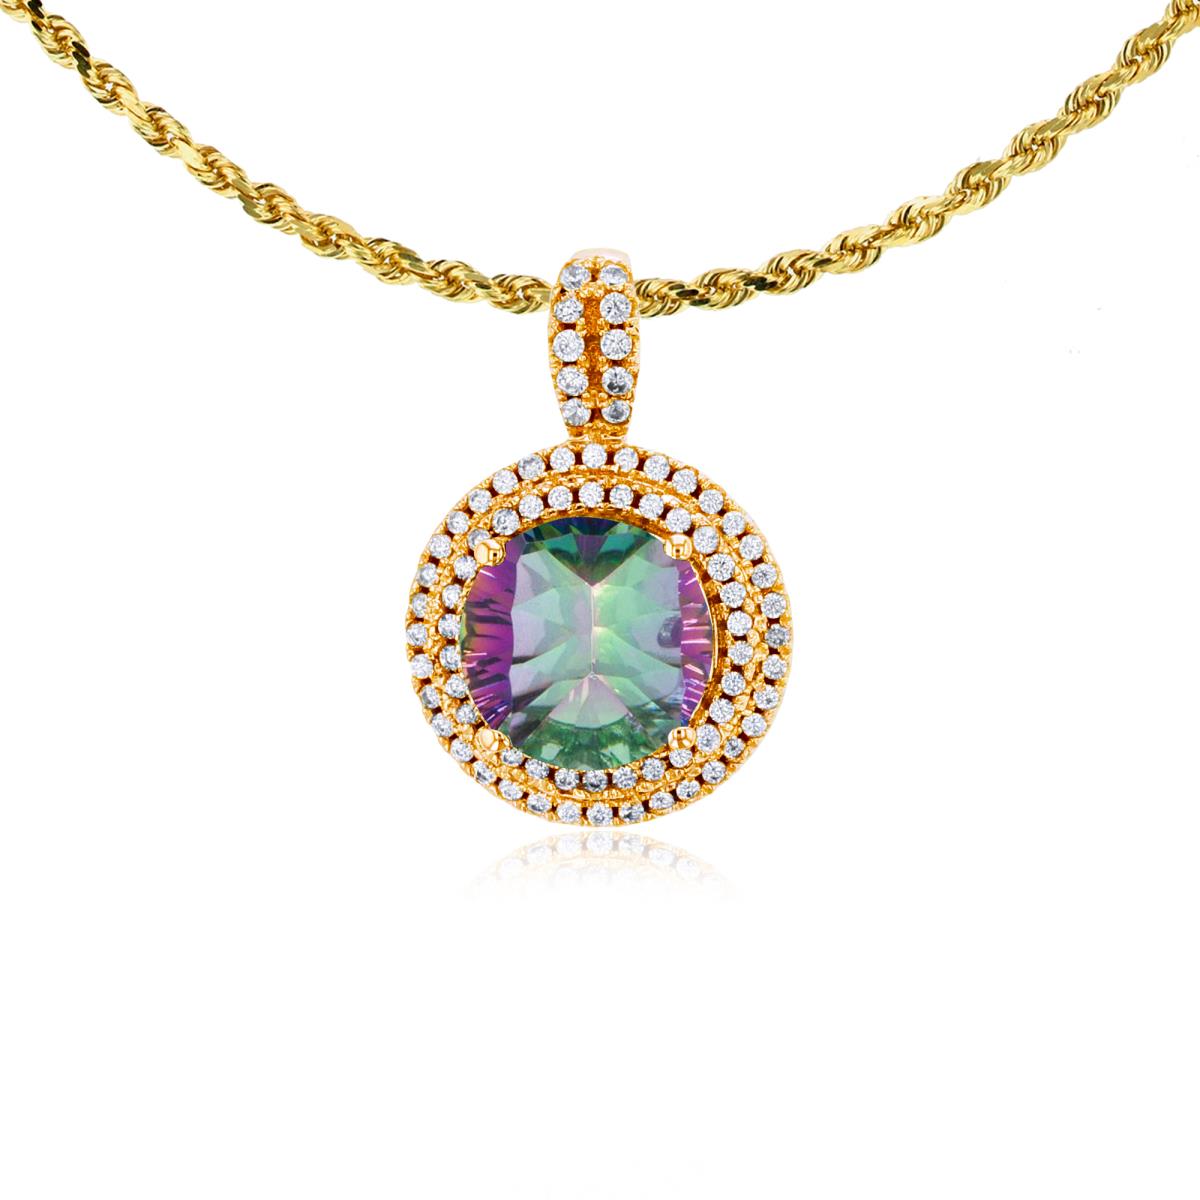 10K Yellow Gold 7mm Round Mystic Green Topaz & 0.25 CTTW Diamonds Double Halo 18" Rope Chain Necklace